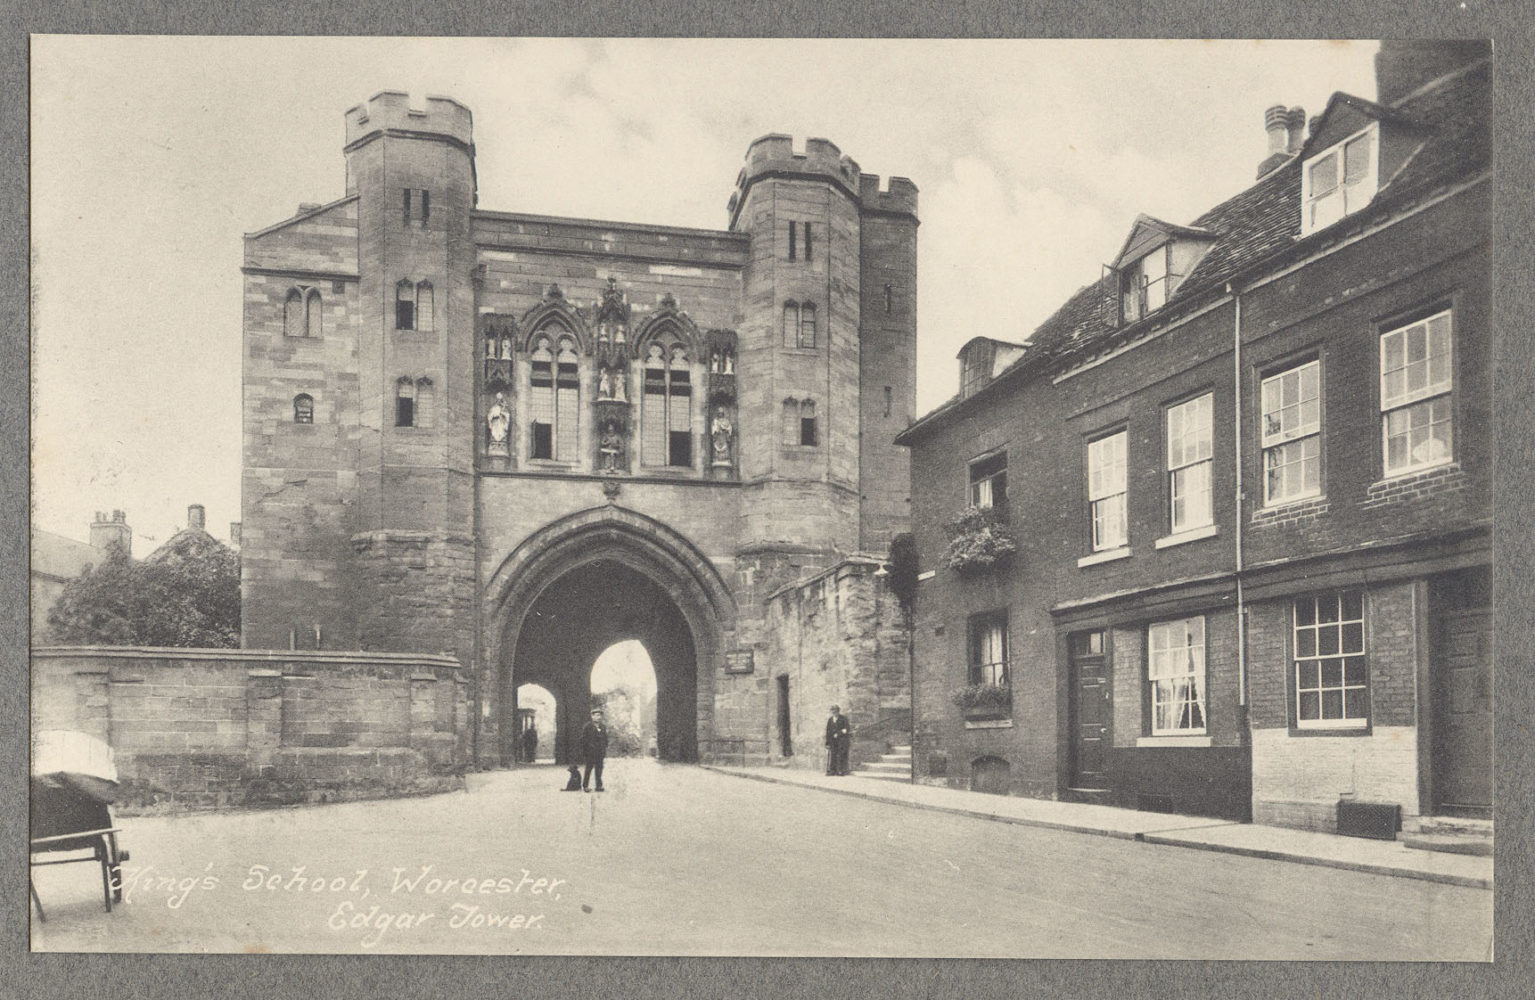 Edgar Tower - King's Worcester Archives